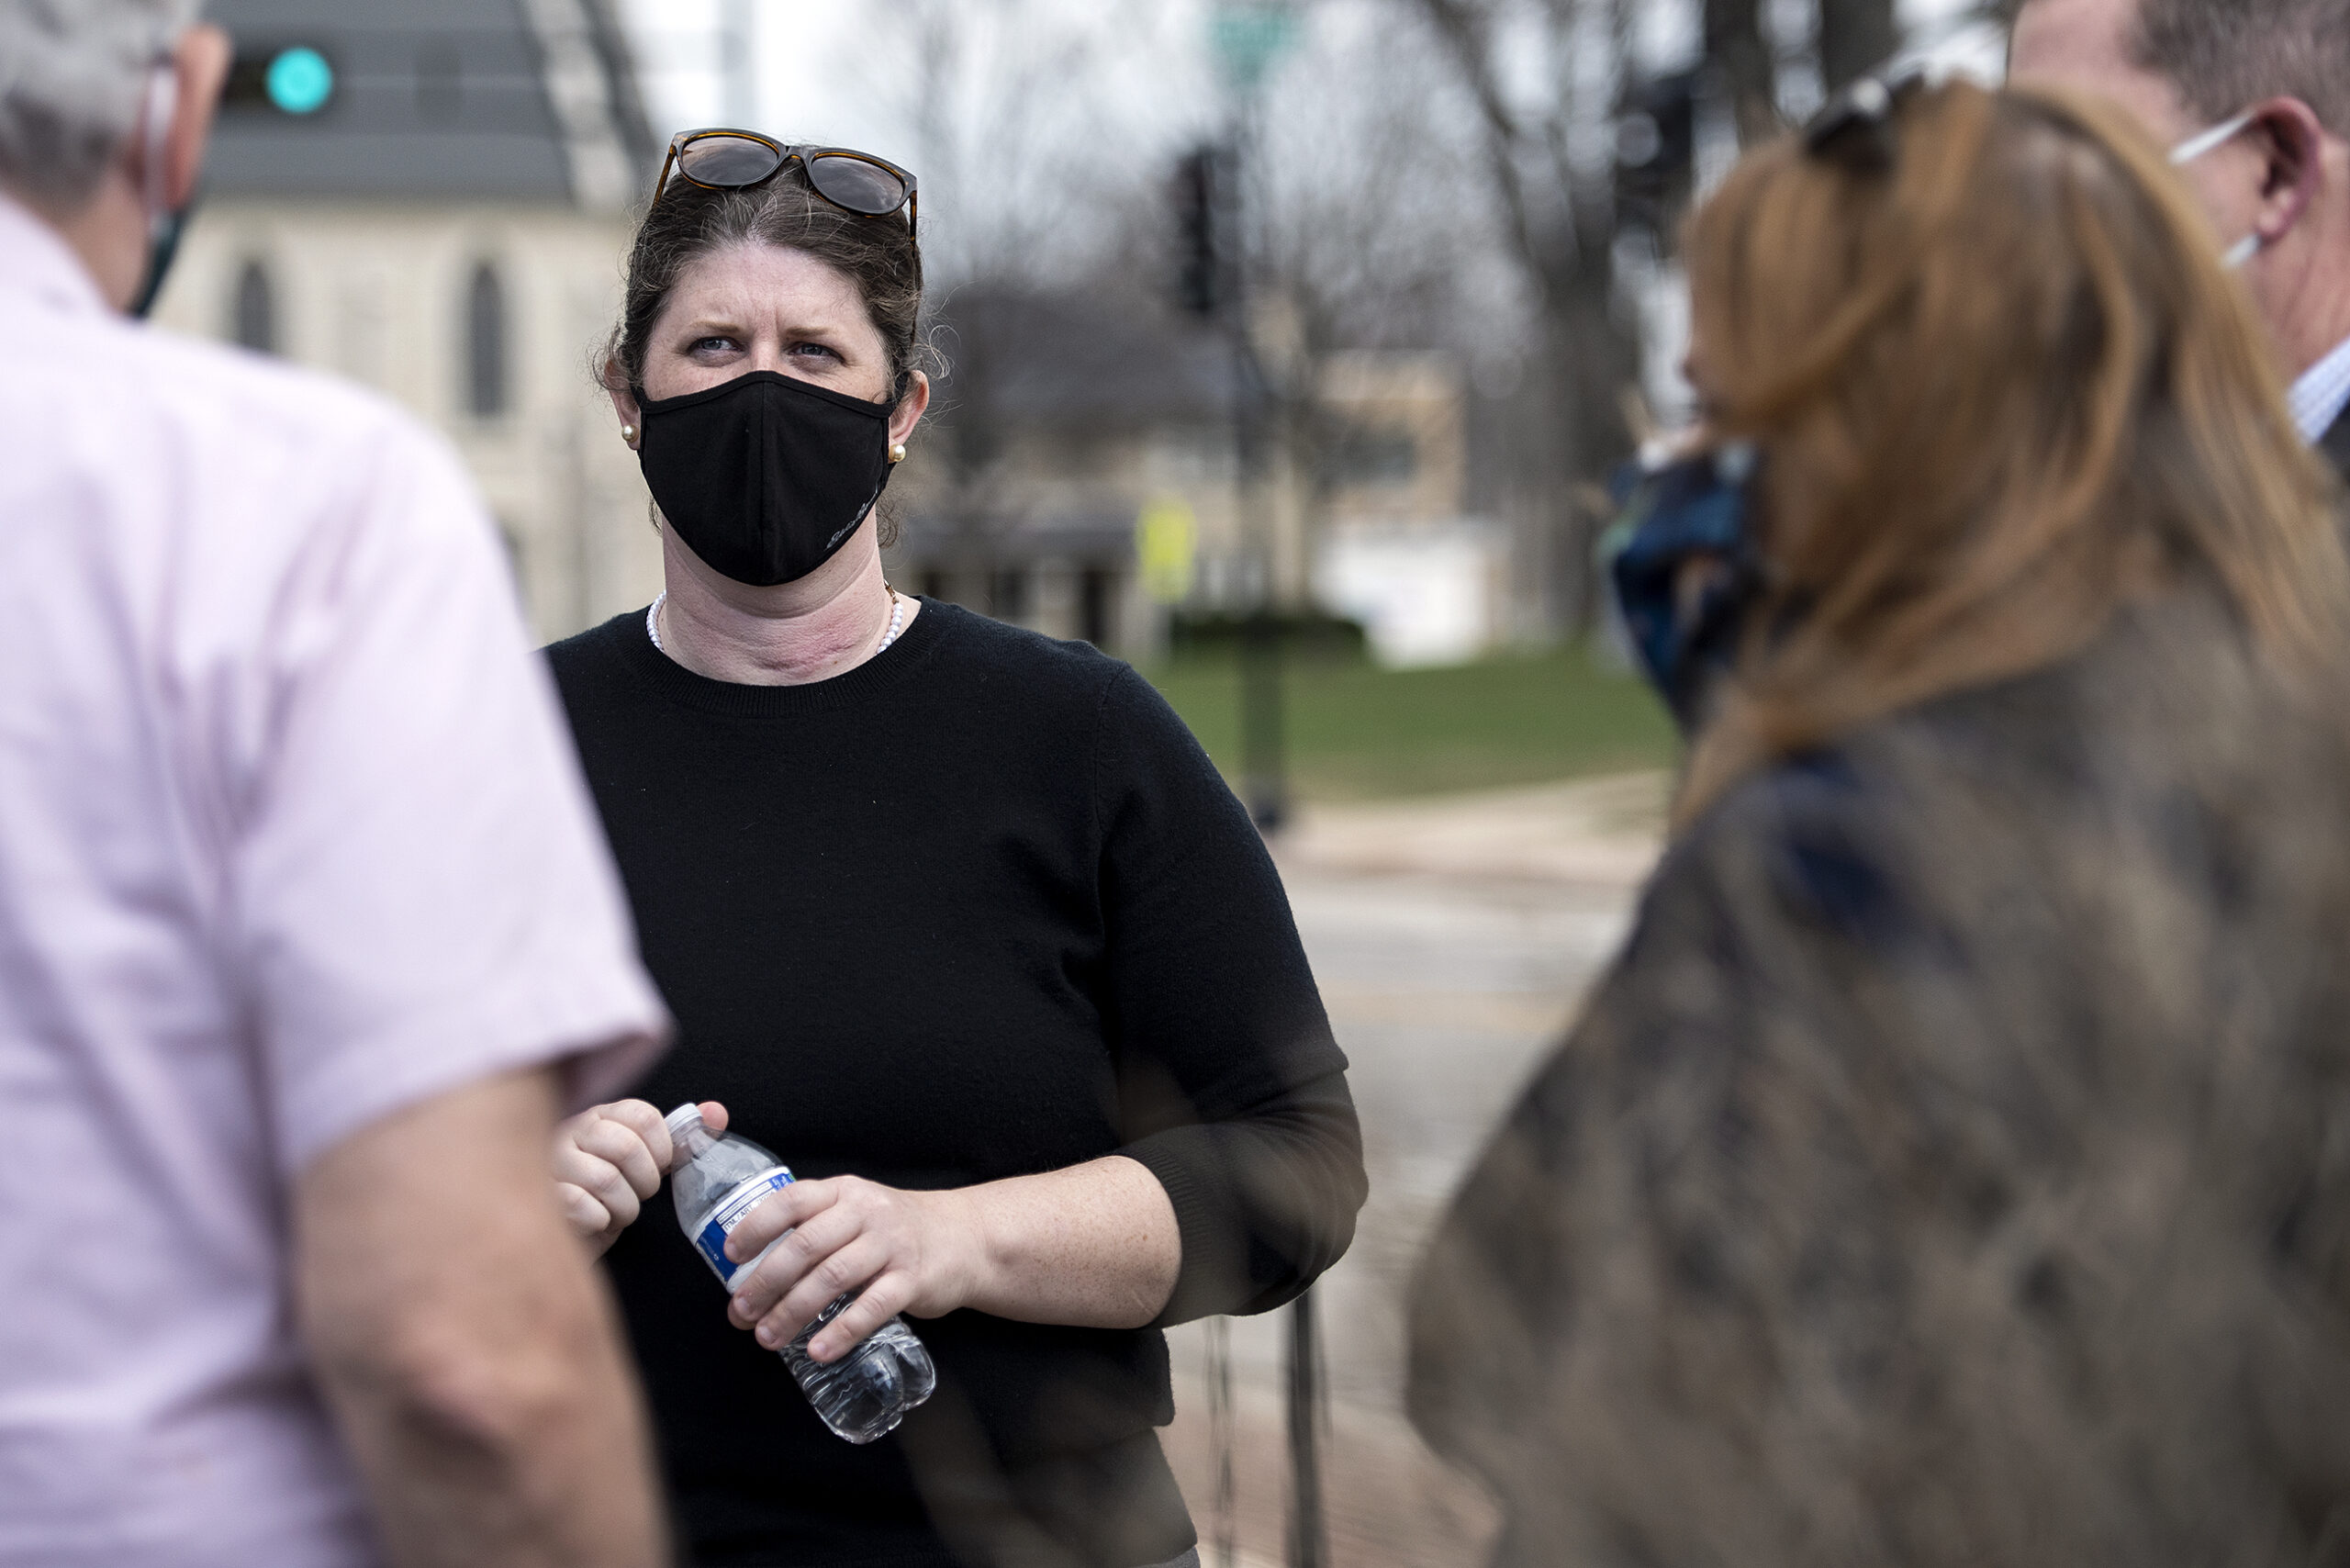 A woman in a black face mask speaks to people outside.